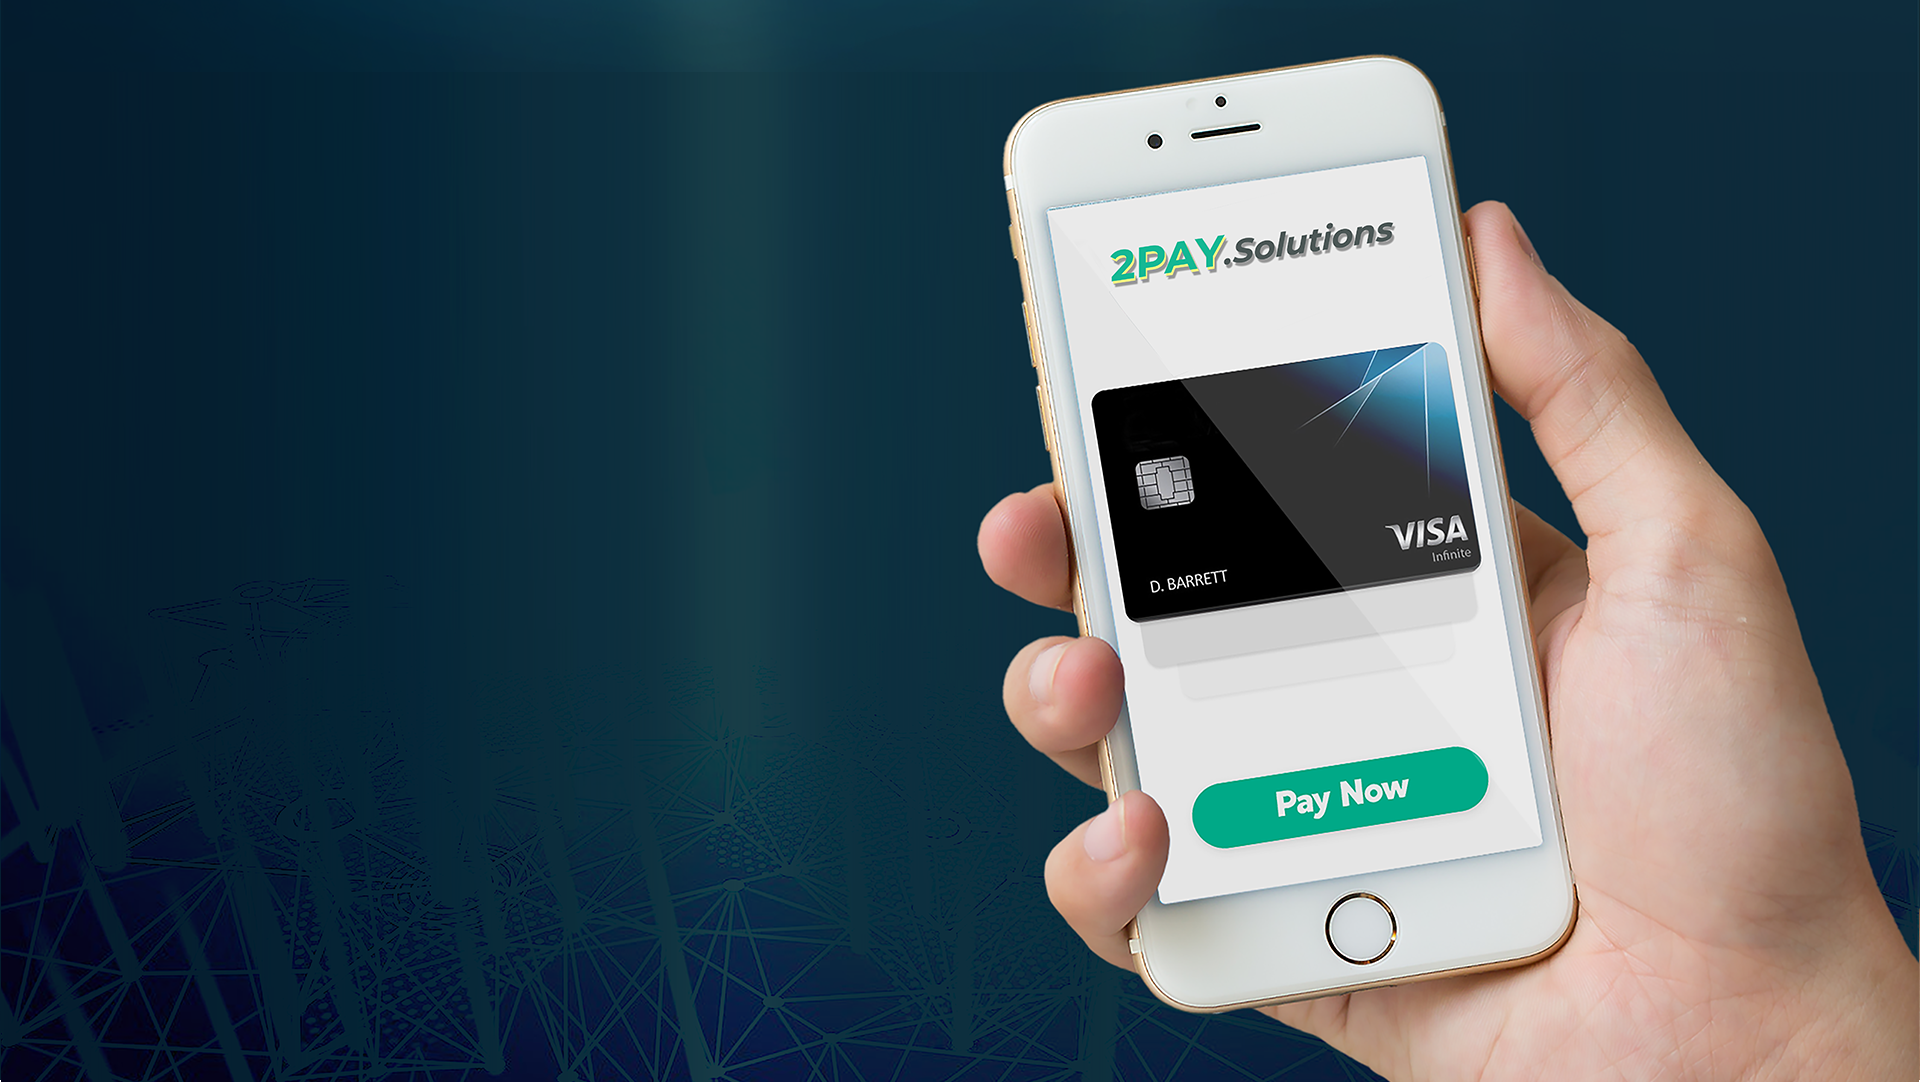 2Pay Solutions